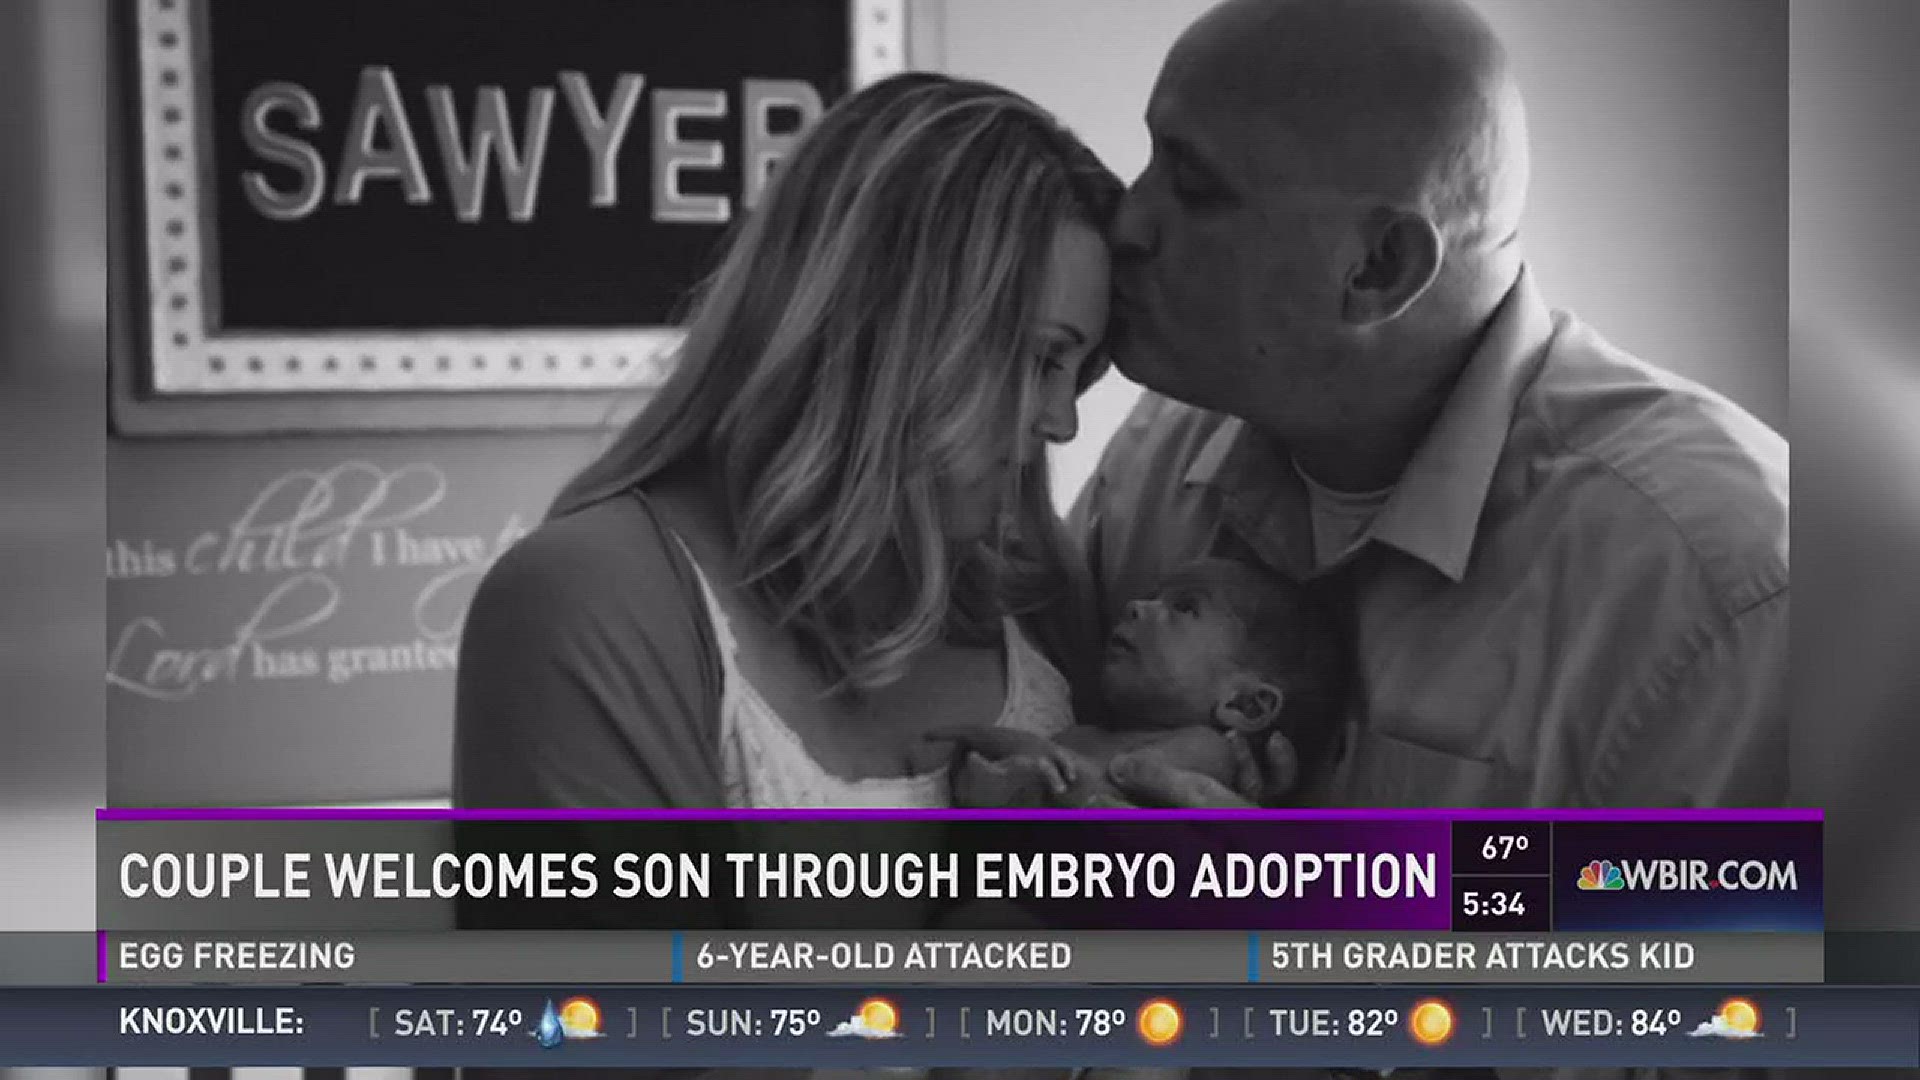 Most people who struggle with infertility will tell you it's exhausting and incredibly painful.  Jerry and Amber Lacey would agree.  They endured failed treatments and a failed adoption.  The couple had almost given up their dream of having a child.  Then